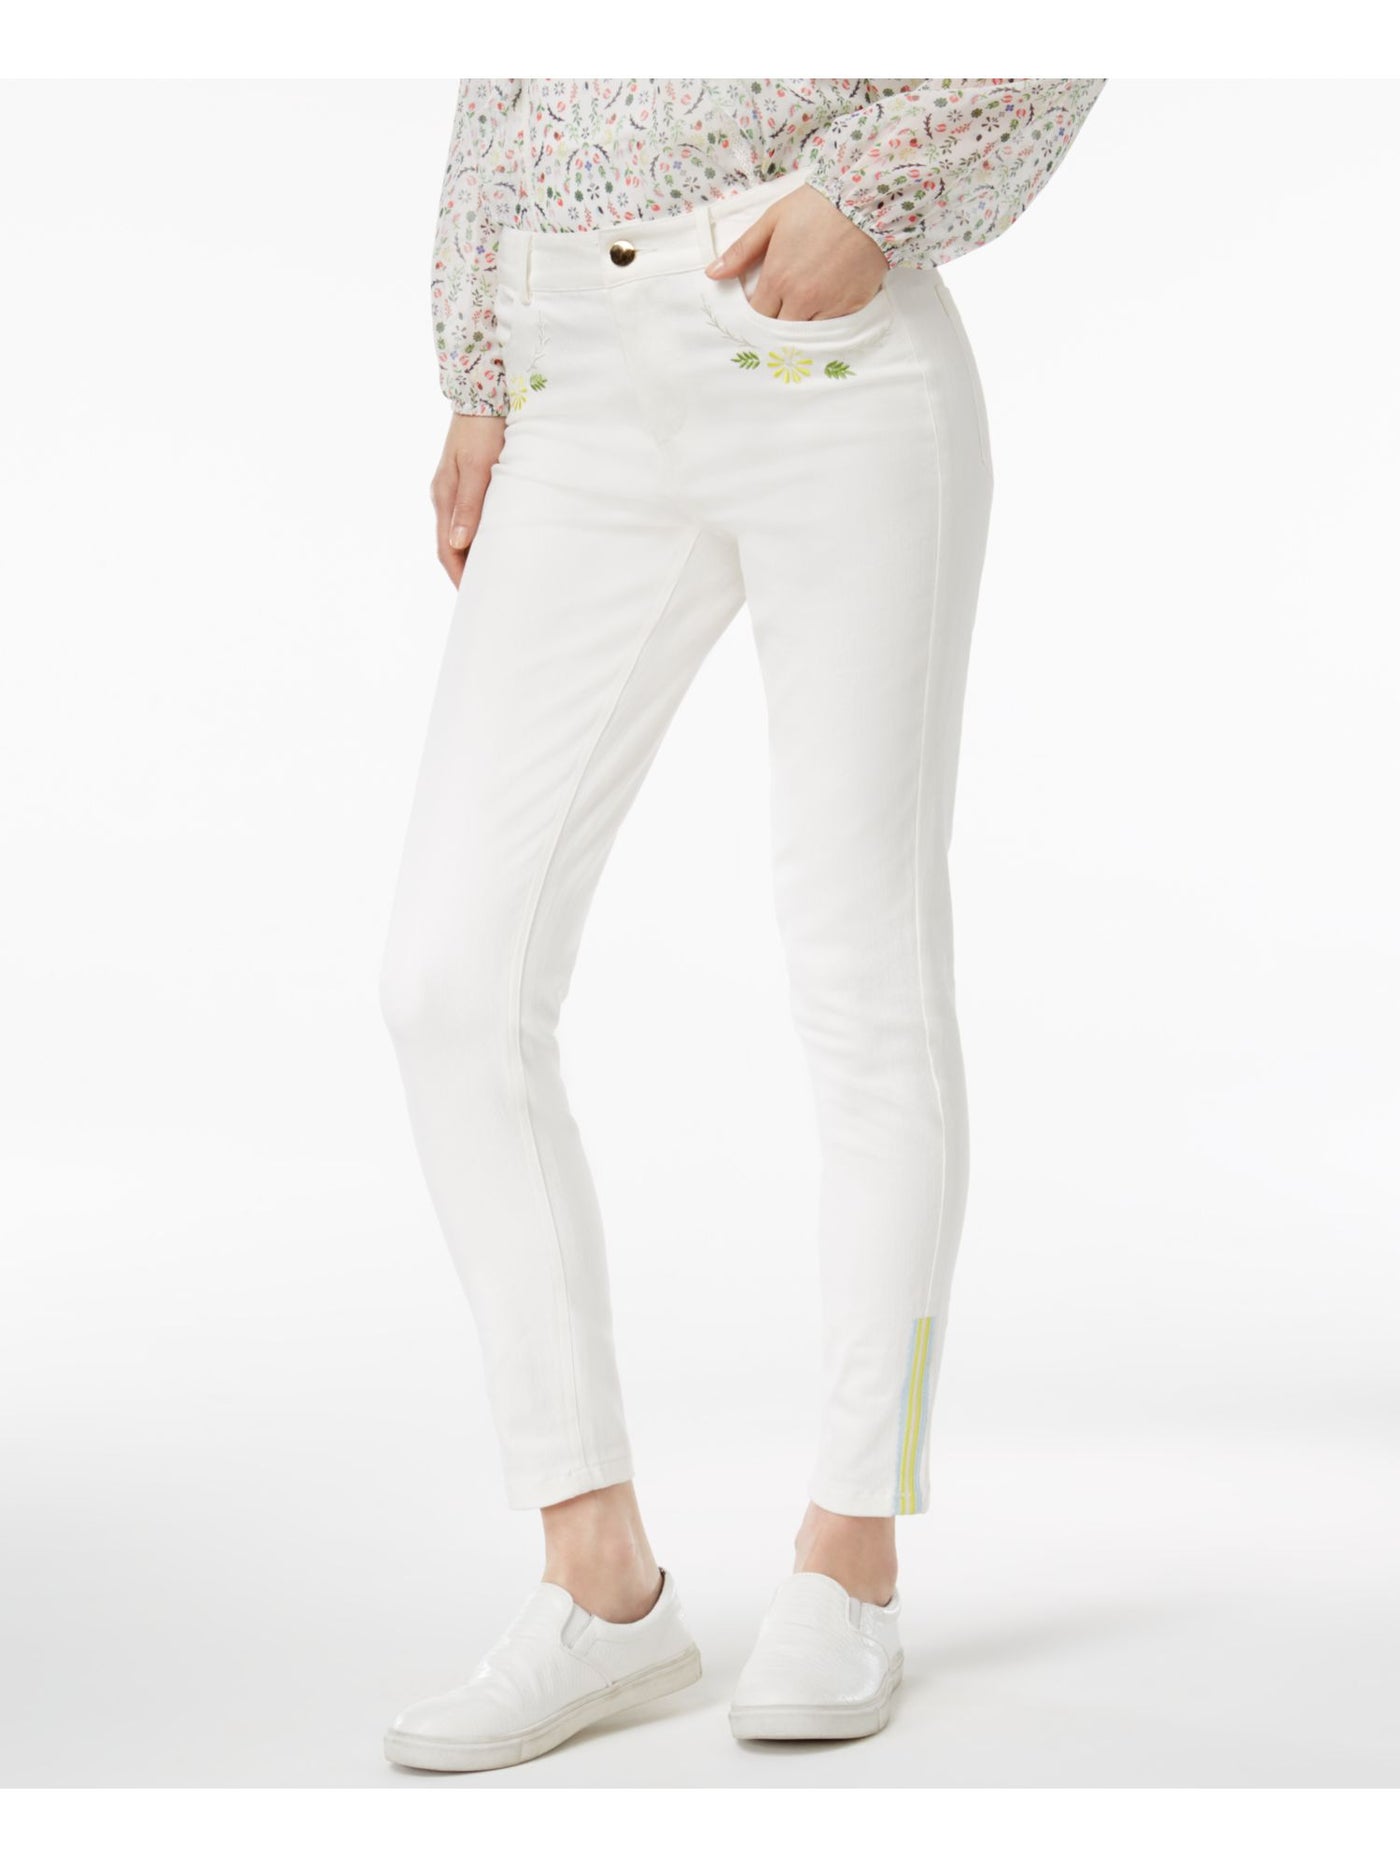 CYNTHIA ROWLEY Womens White Embroidered Jeans Size: 12